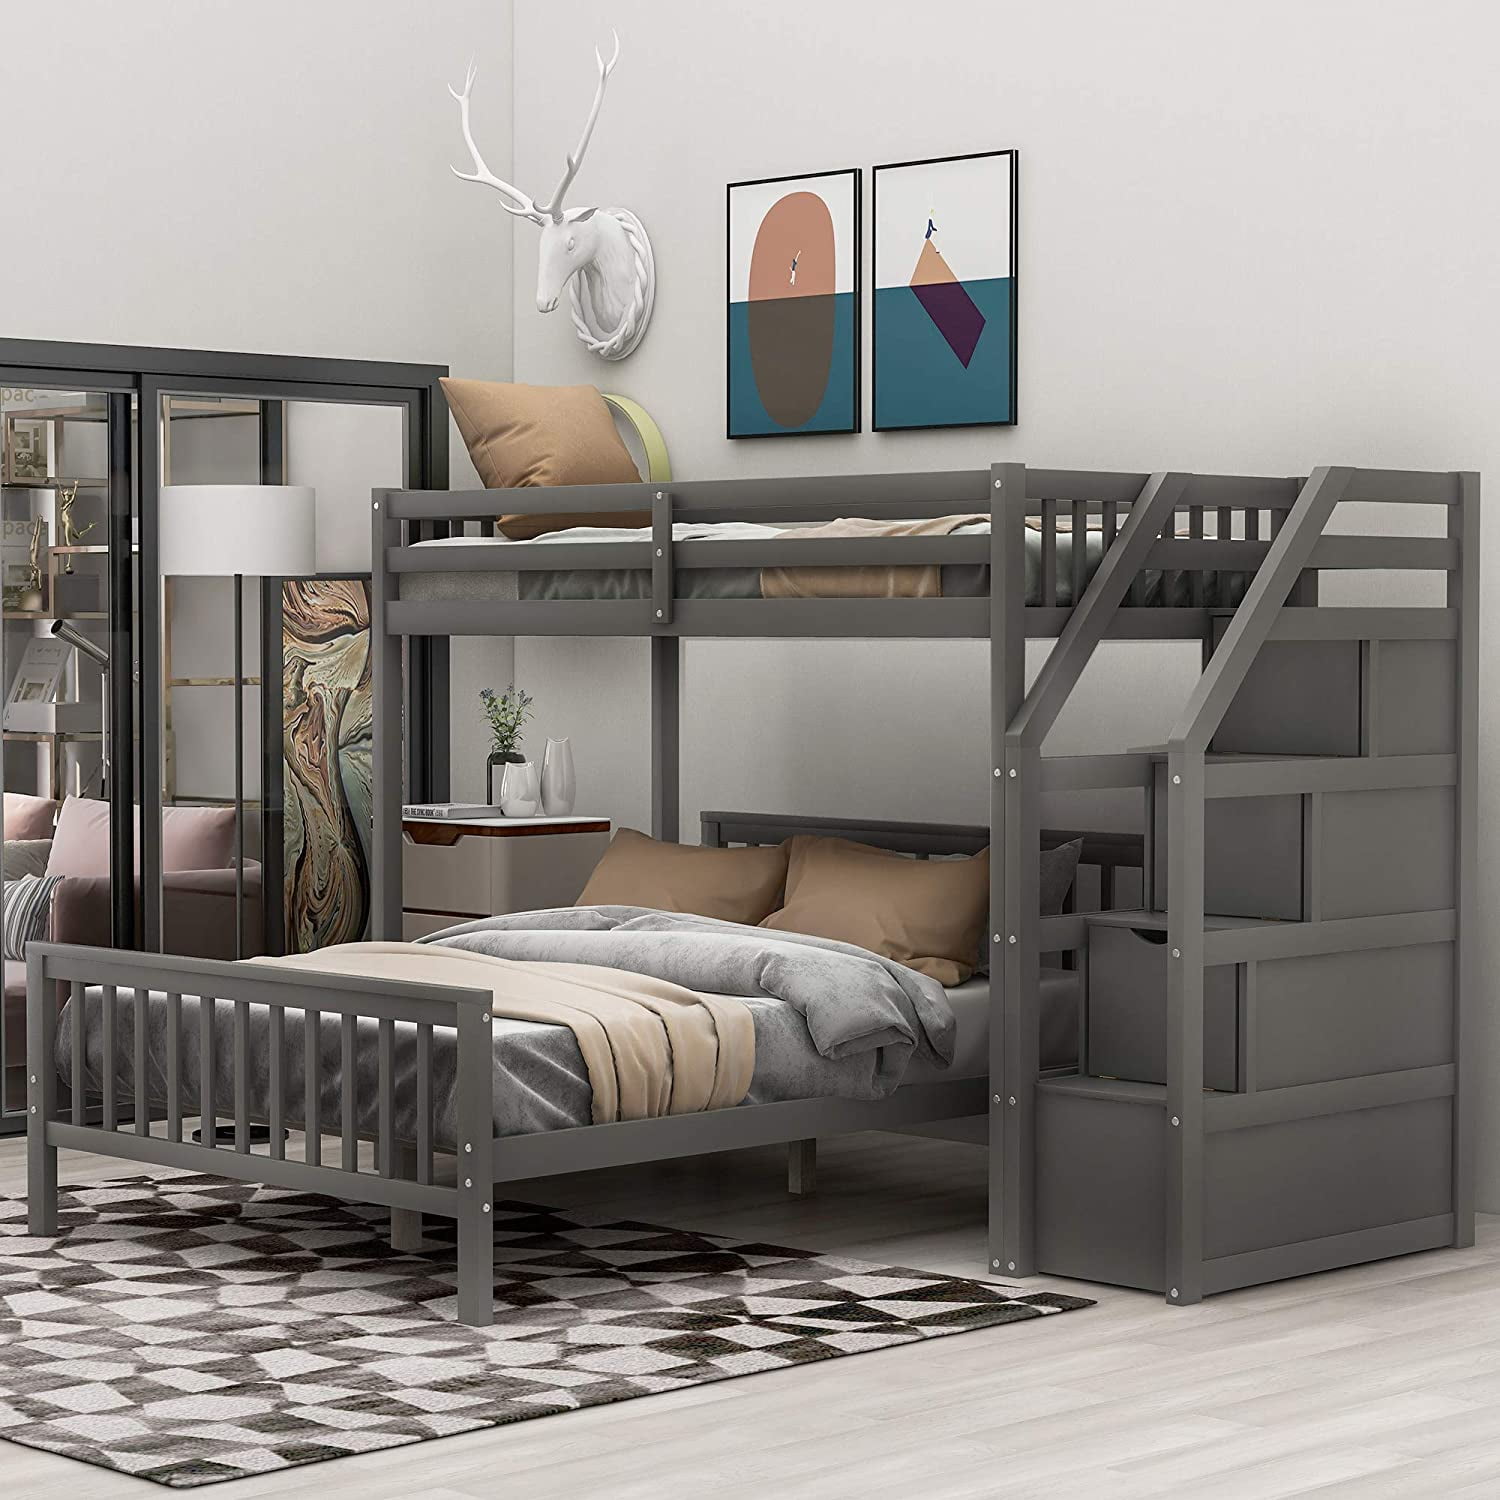 Twin Over Full Loft Beds Bunk, Wood Bunk Beds Twin Over Full